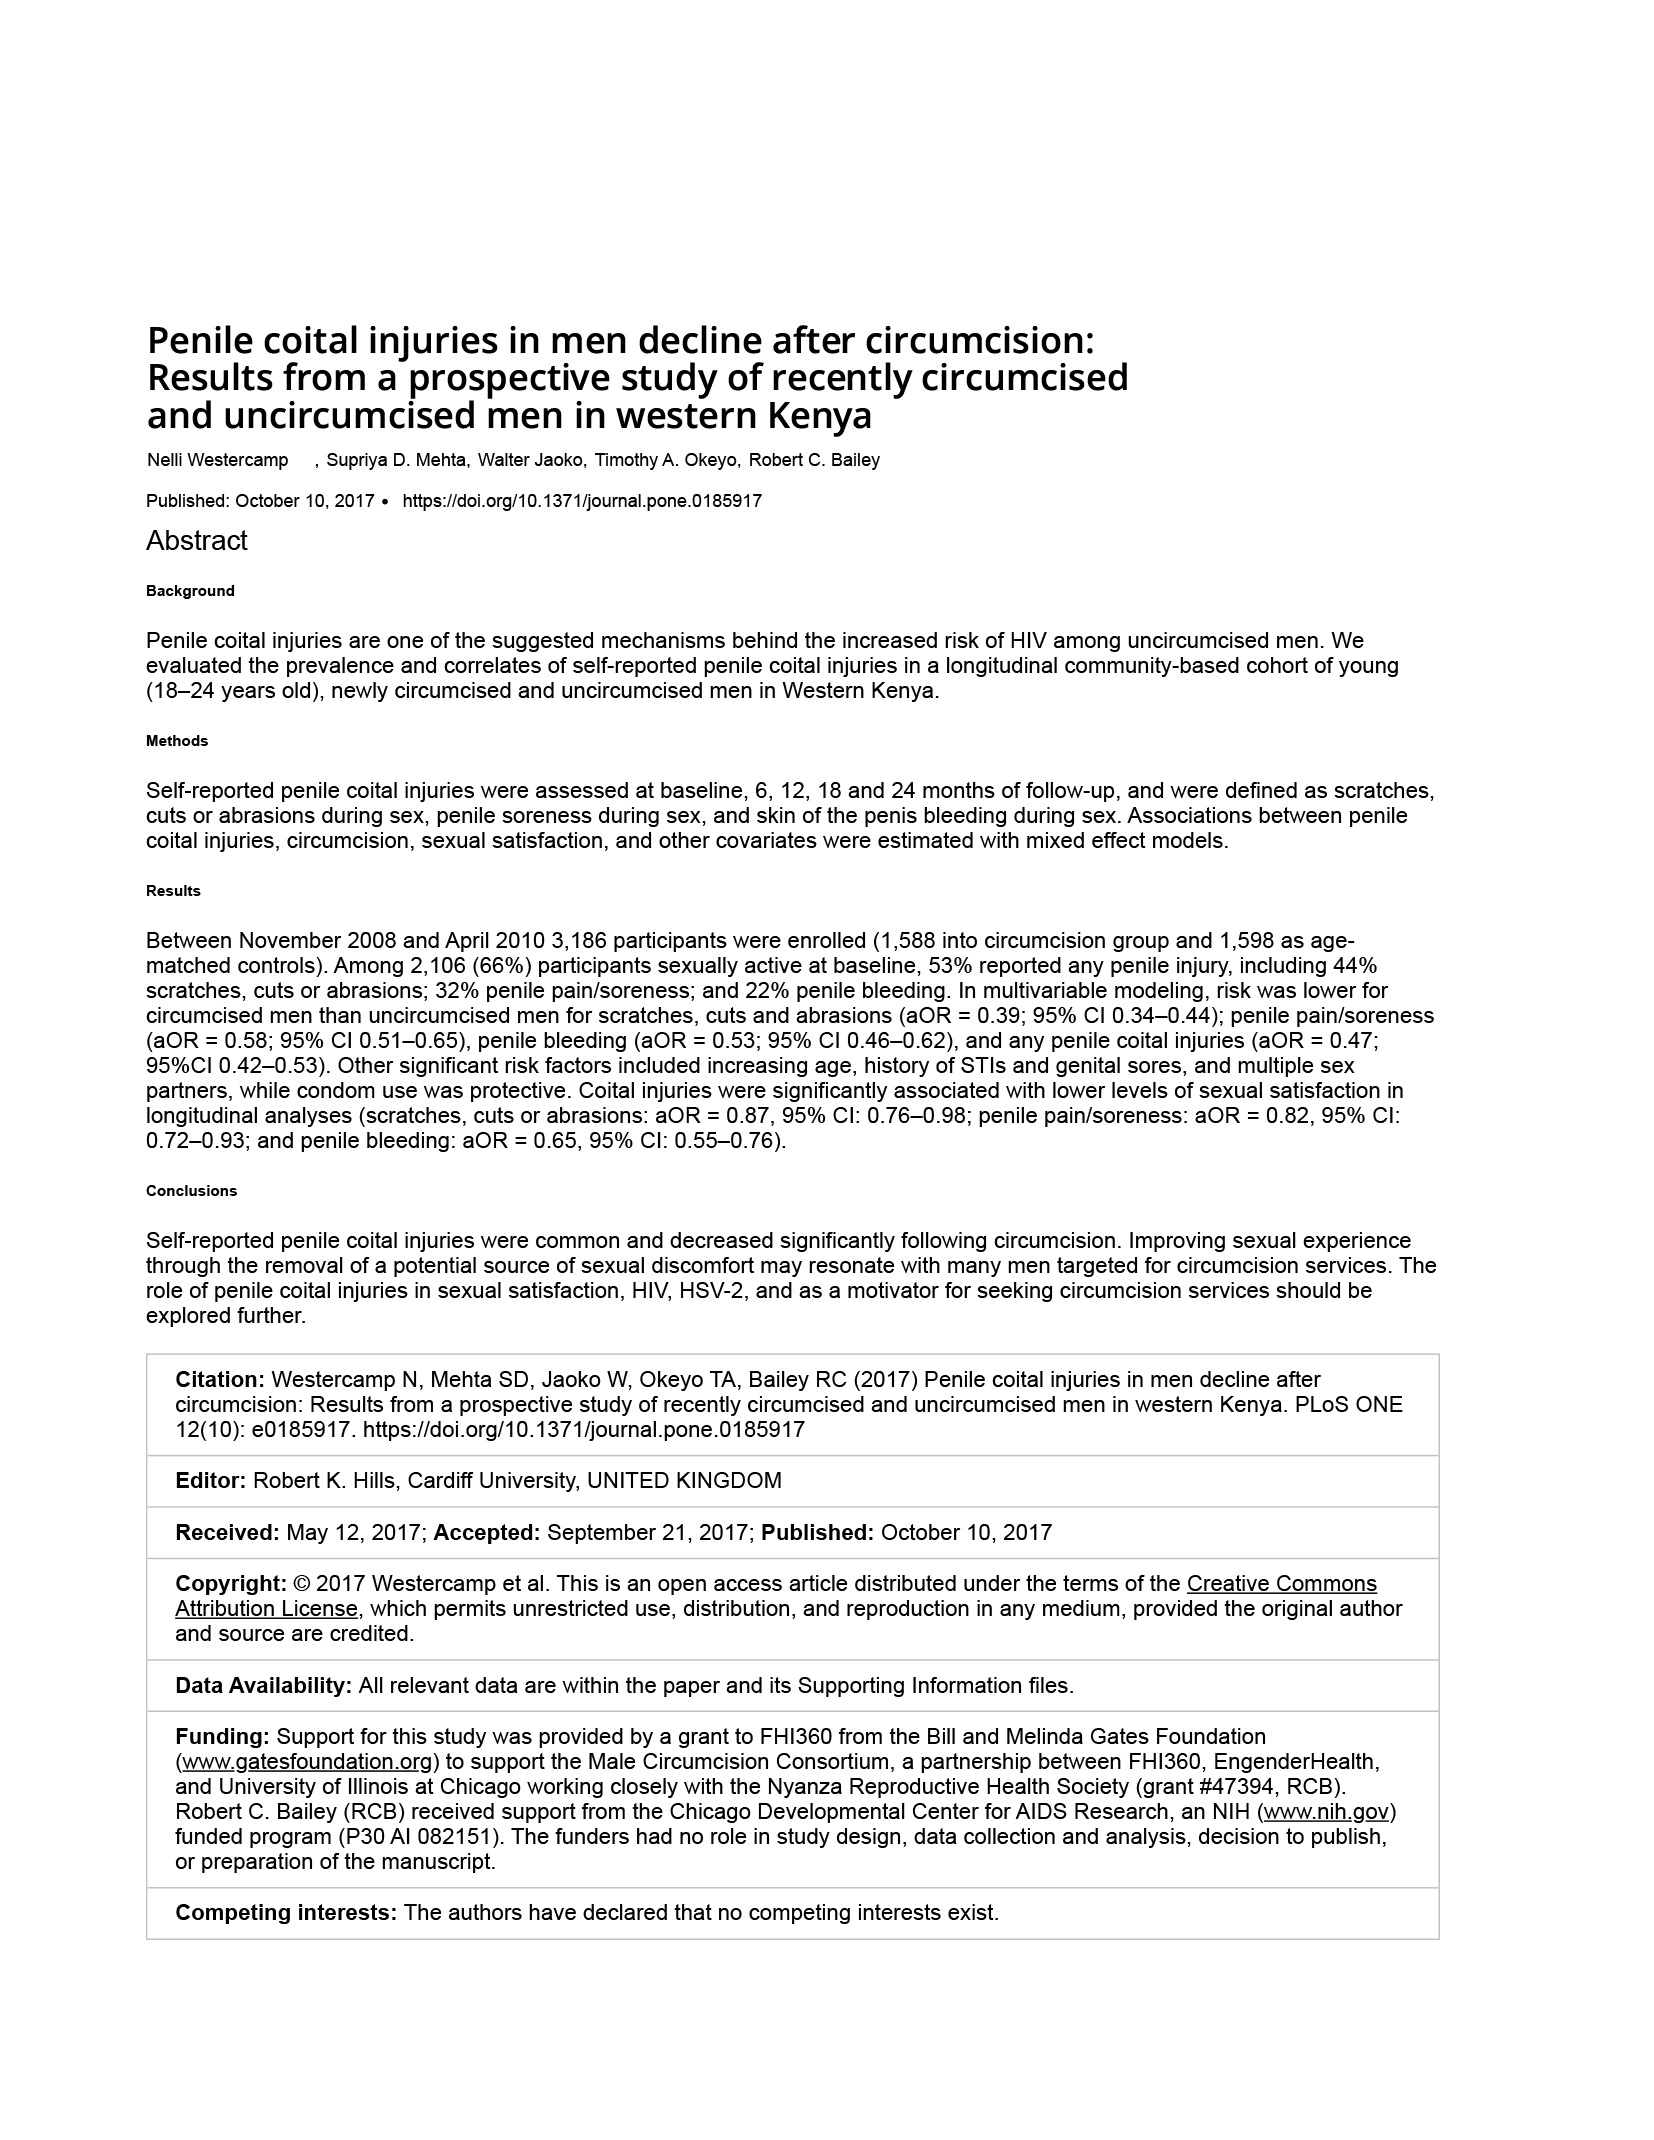 Penile Coital Injuries in Men Decline after Circumcision: Results from a Prospective Study of Recently Circumcised and Uncircumcised Men in Western Kenya - cover